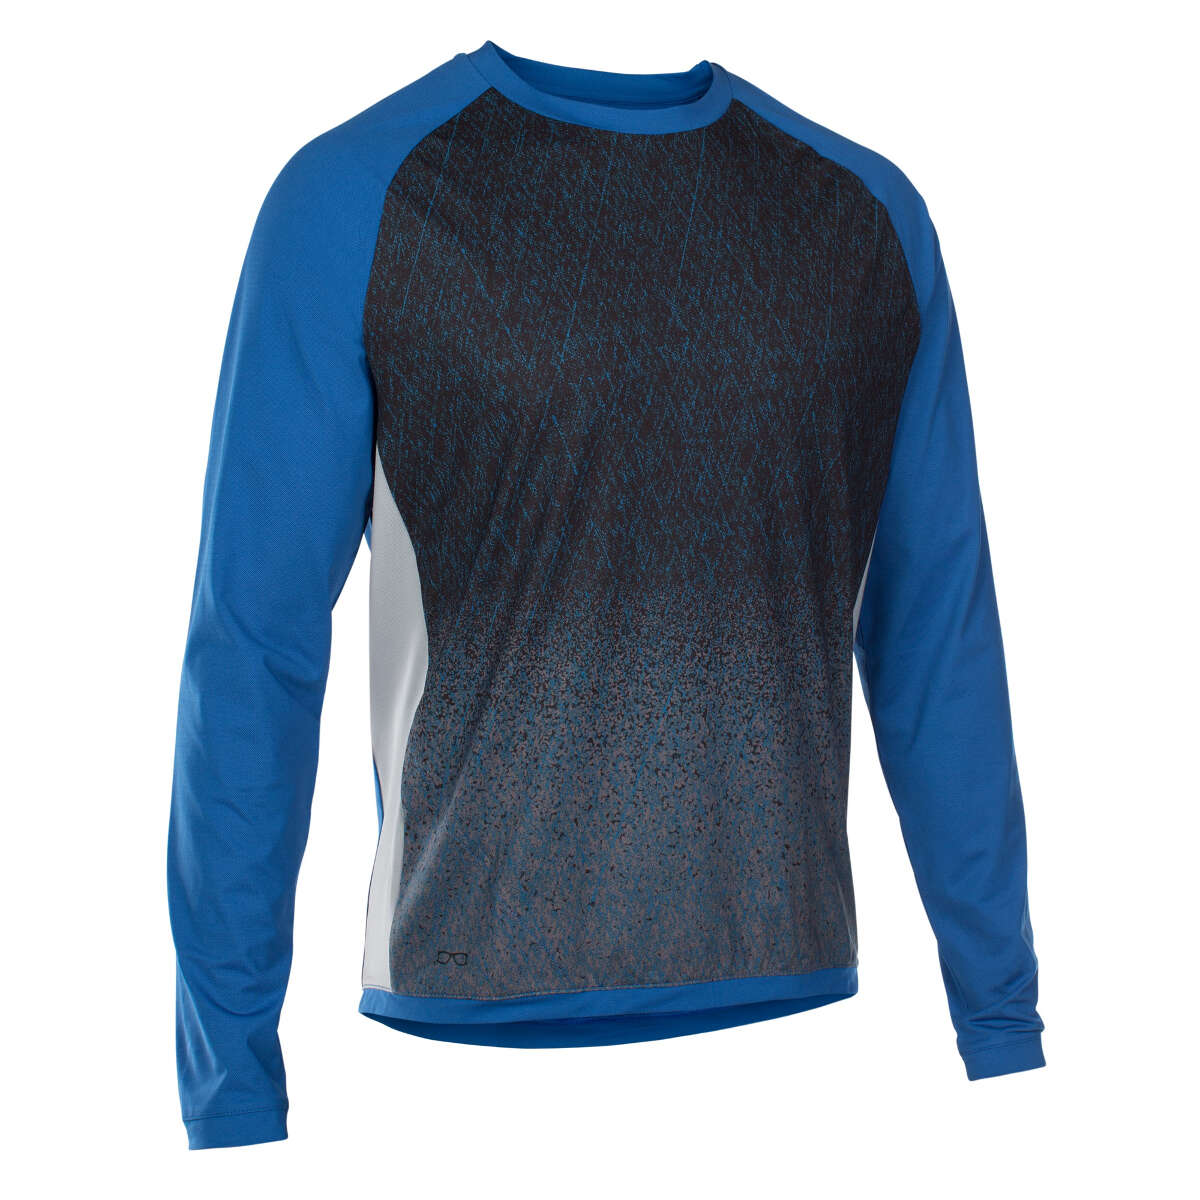 ION Maillot VTT Manches Longues Traze Amp Torrent Blue